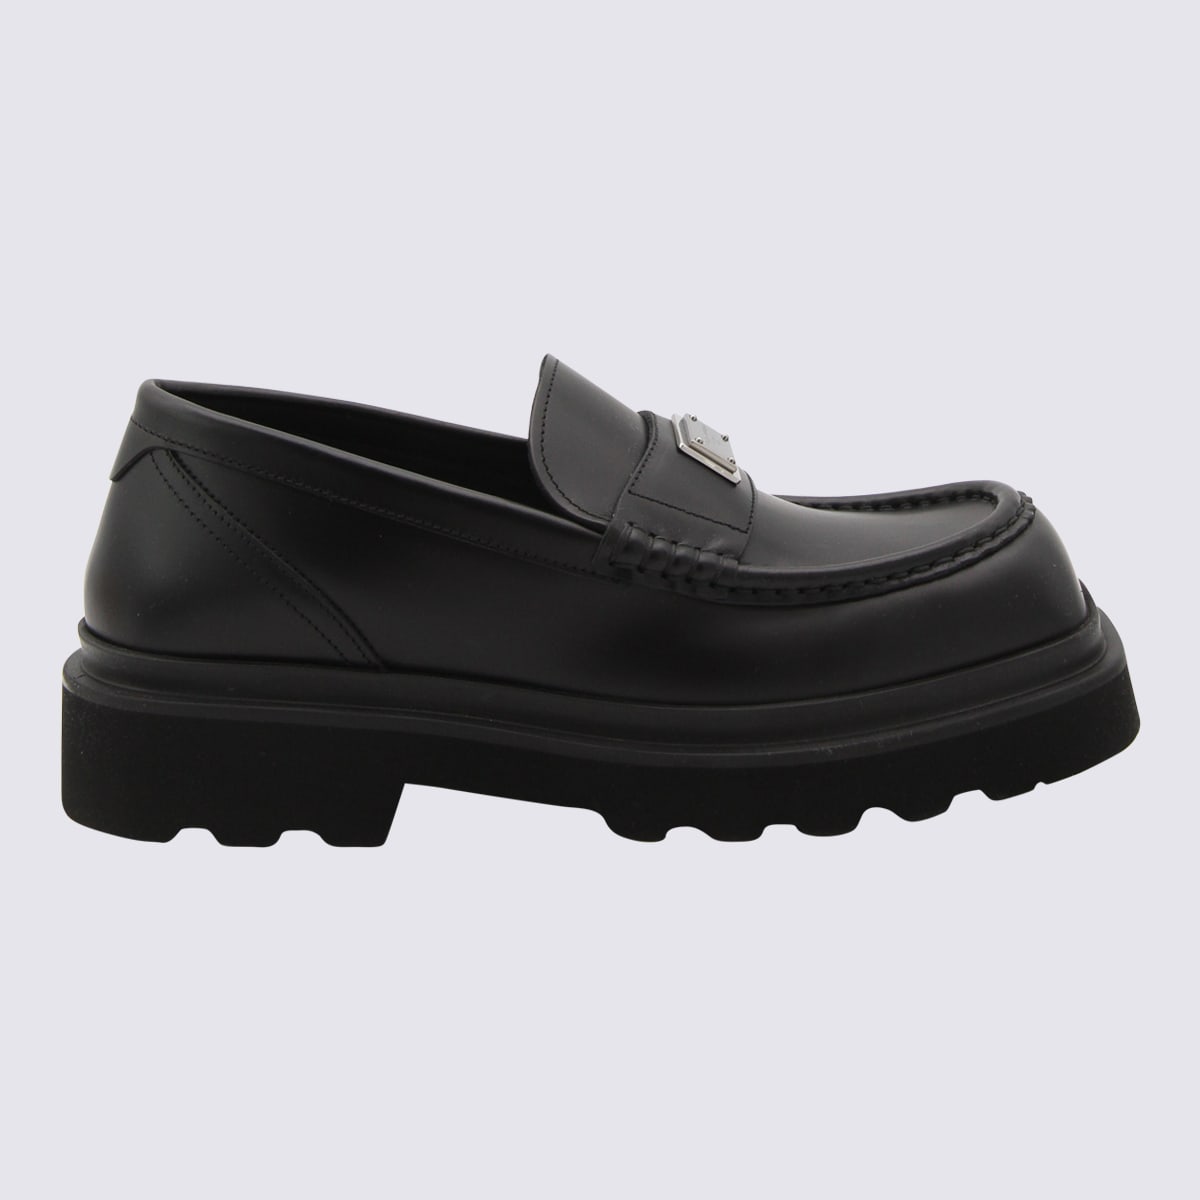 Dolce & Gabbana Black Leather Loafers